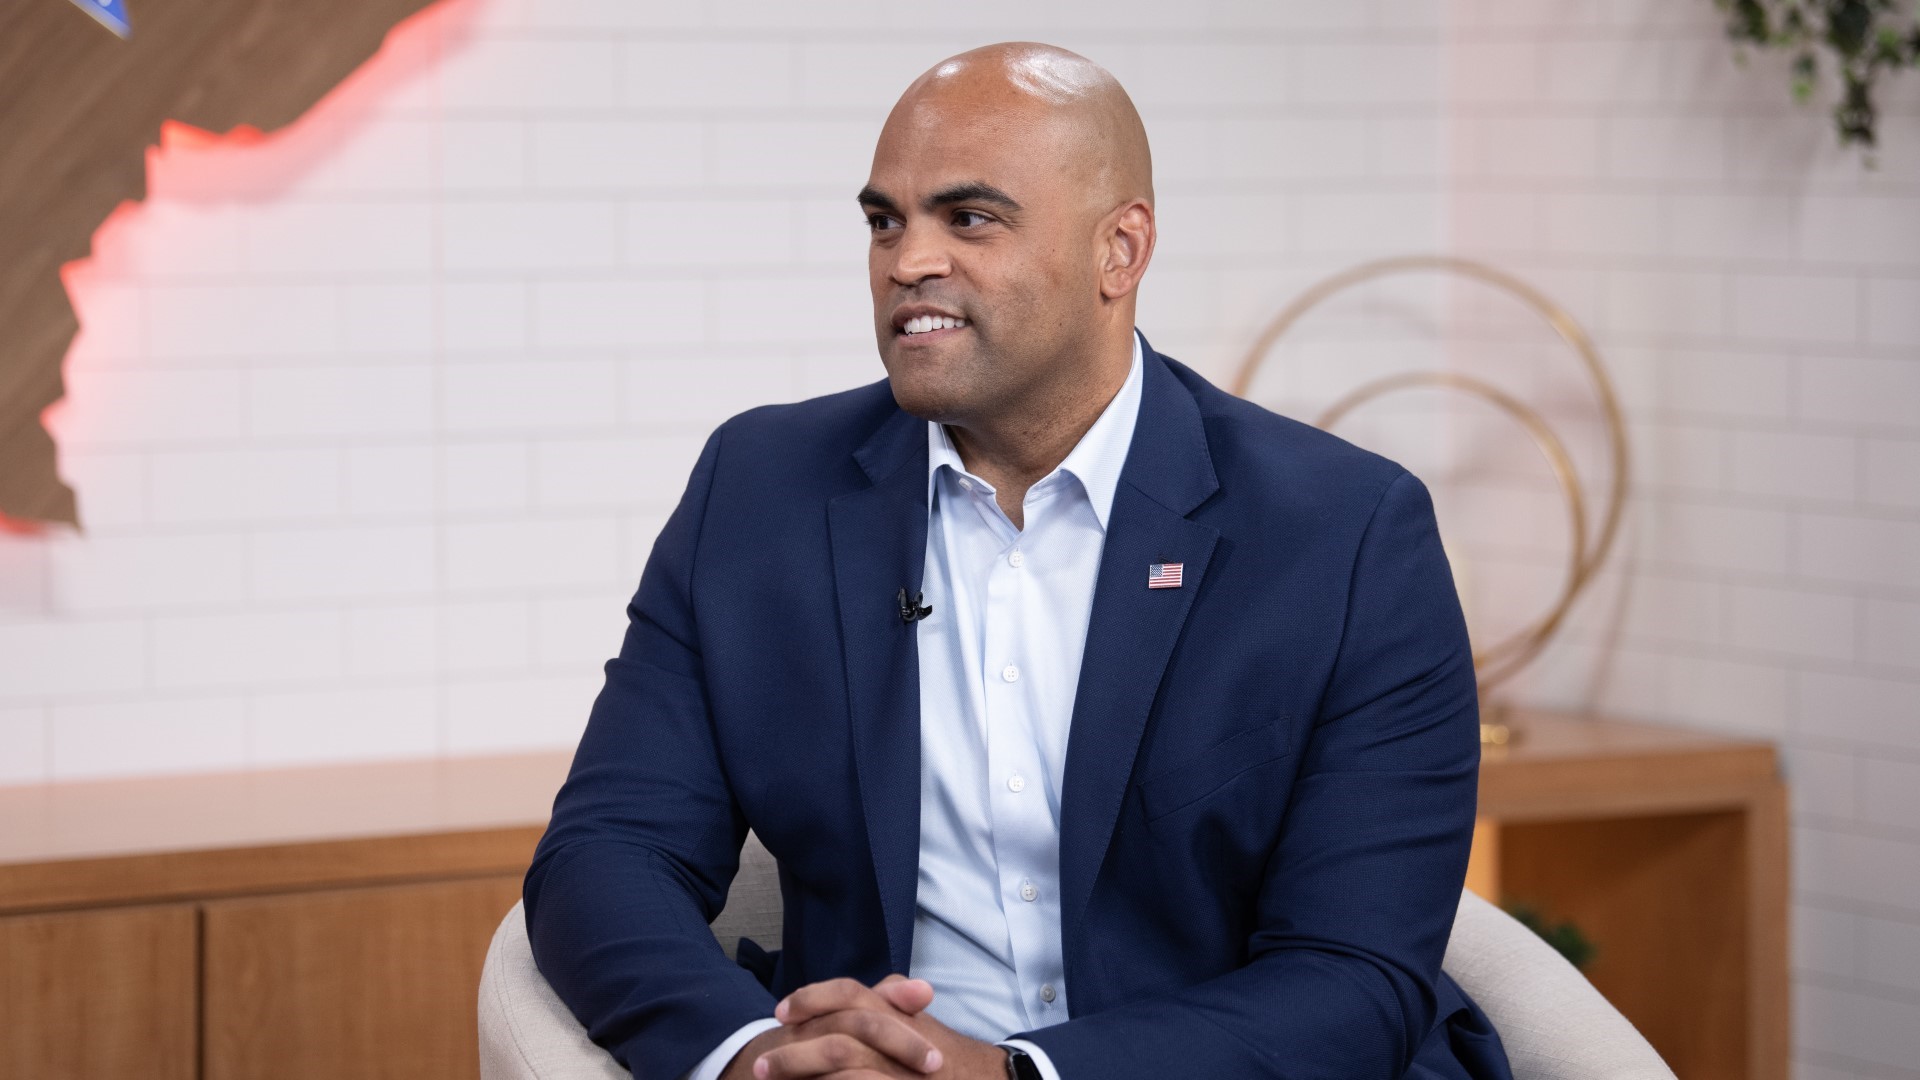 Democratic U.S. Rep. Colin Allred discussed his 2024 U.S. Senate campaign and why he believes he's the Democrats' best candidate to challenge Sen. Ted Cruz.